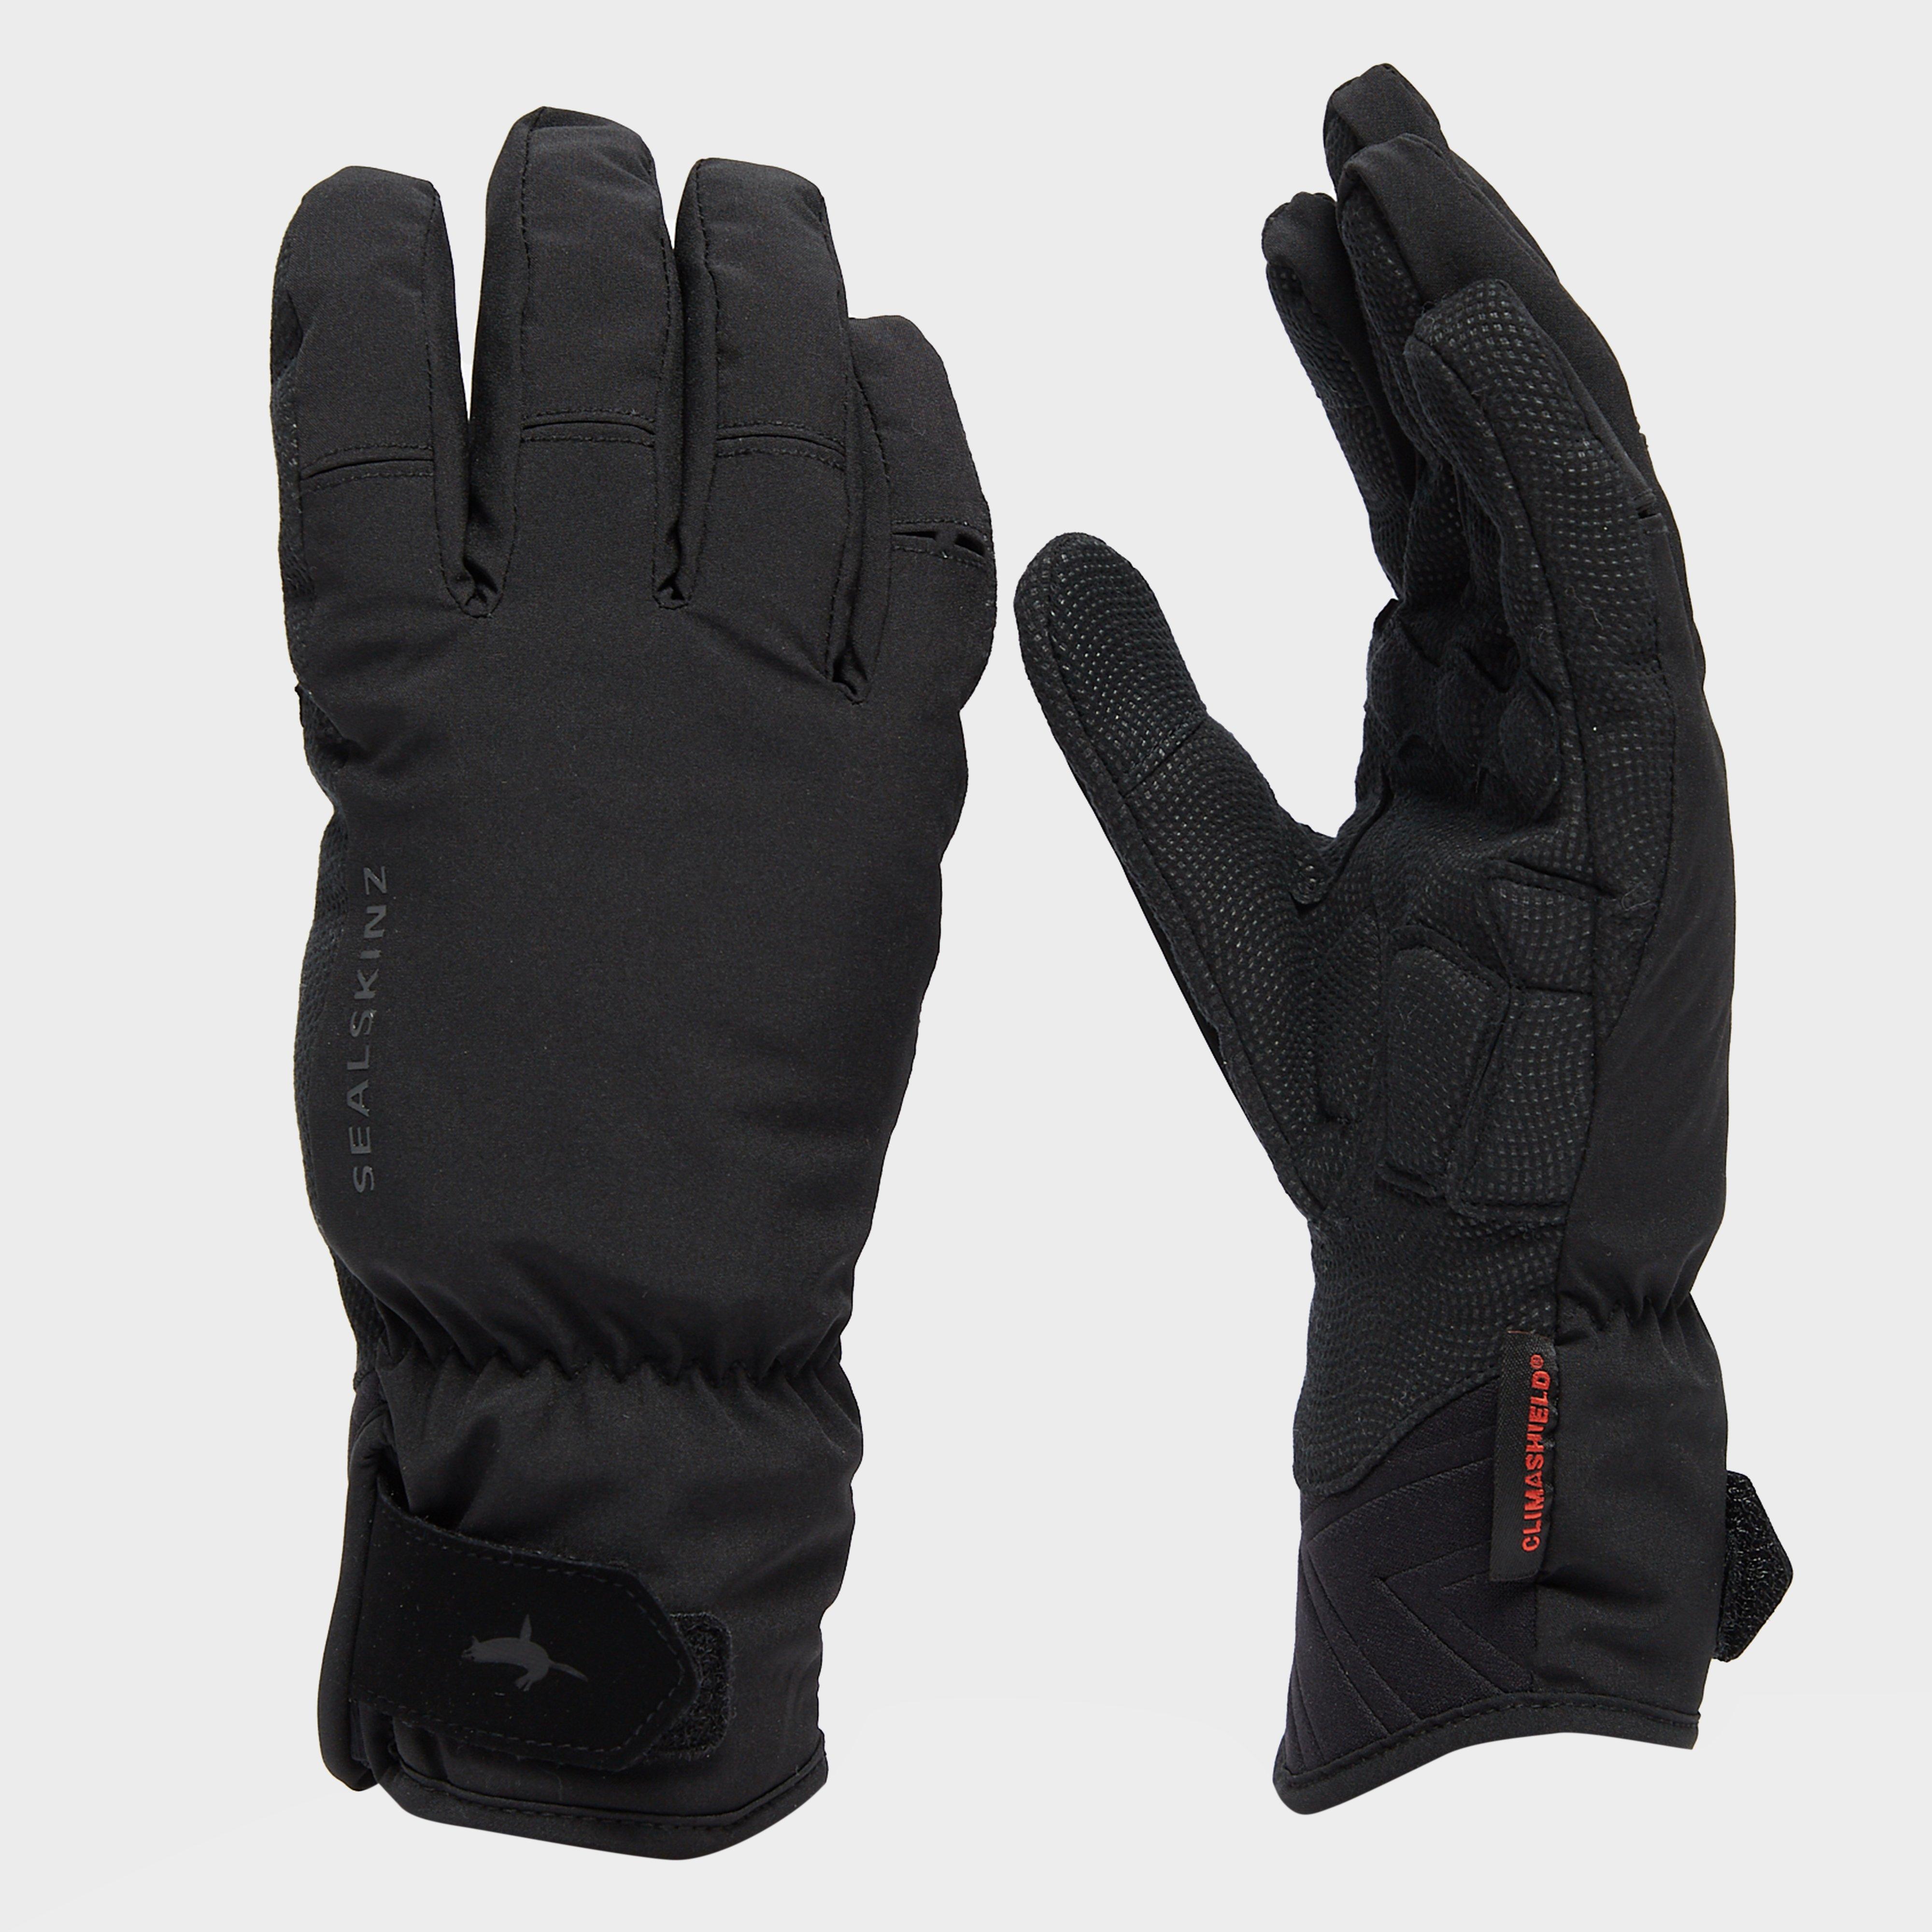 Photos - Cycling Gloves Waterproof Extreme Cold Gloves, Black 